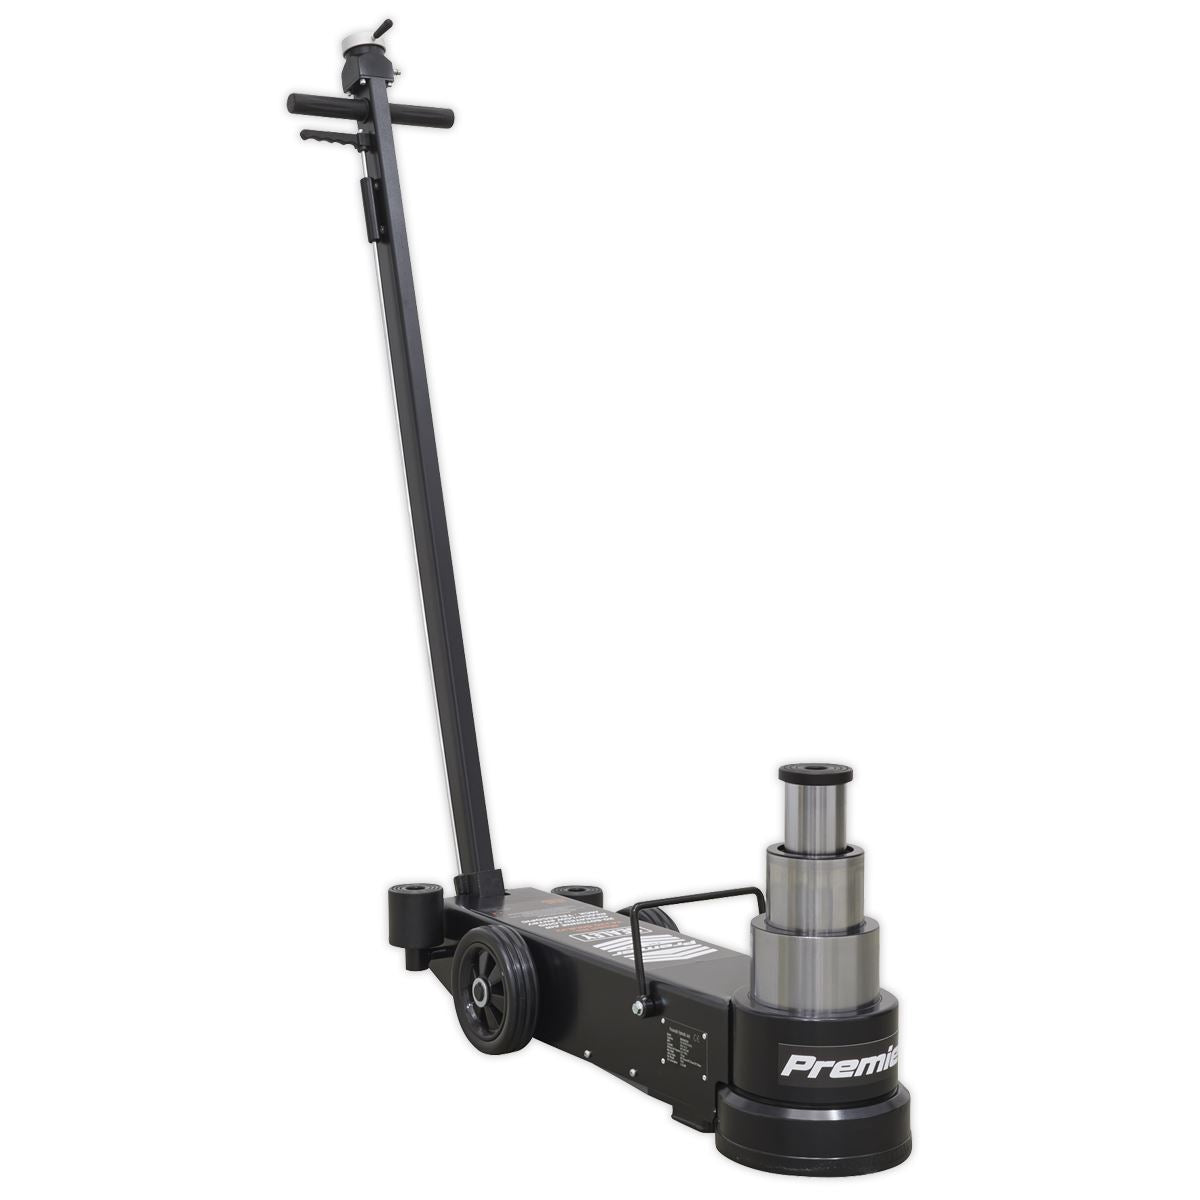 Sealey Air Operated Jack 20-60 Tonne Telescopic - Long Reach/Low Profile